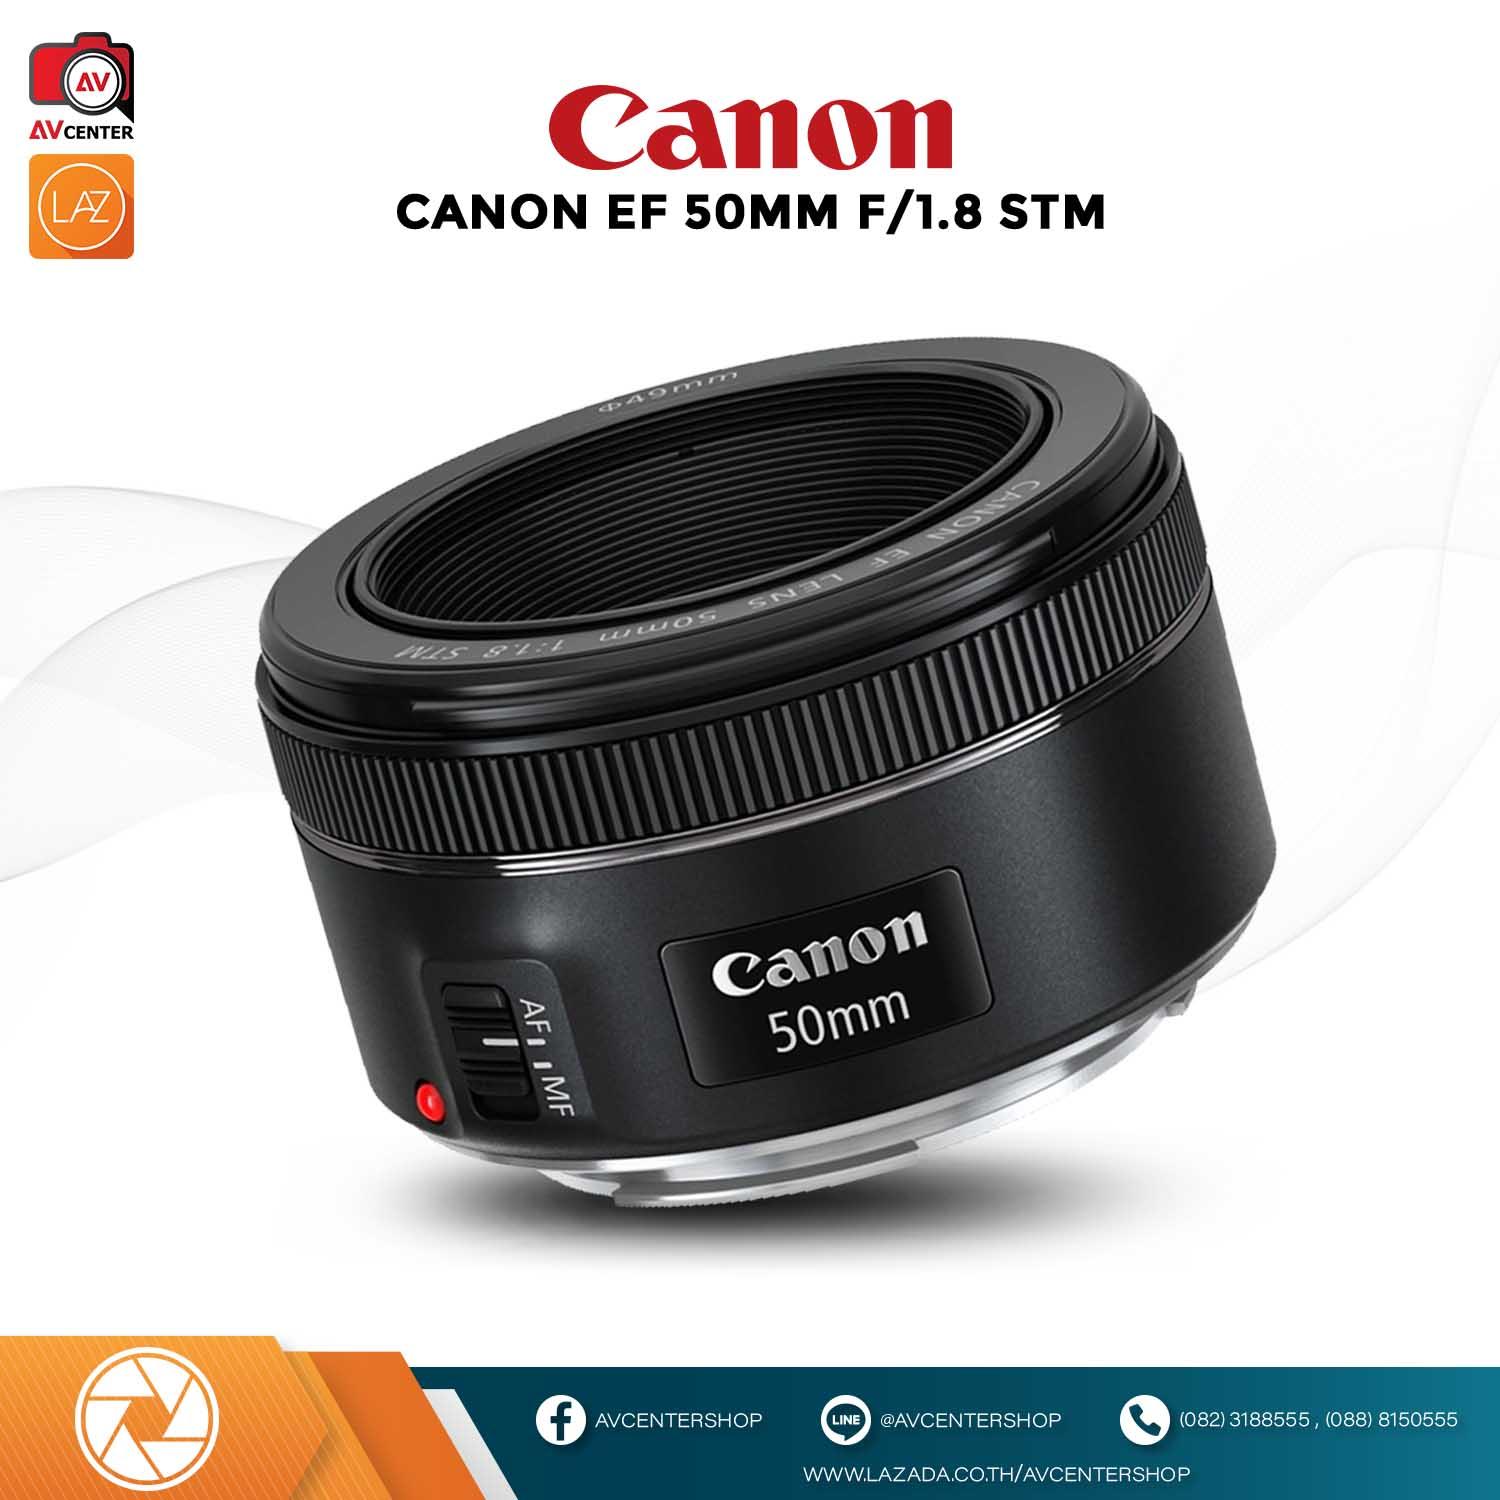 CANON LENS EF 50 MM. F1.8 STM (สินค้ารับประกัน 1ปี By AVcenter)